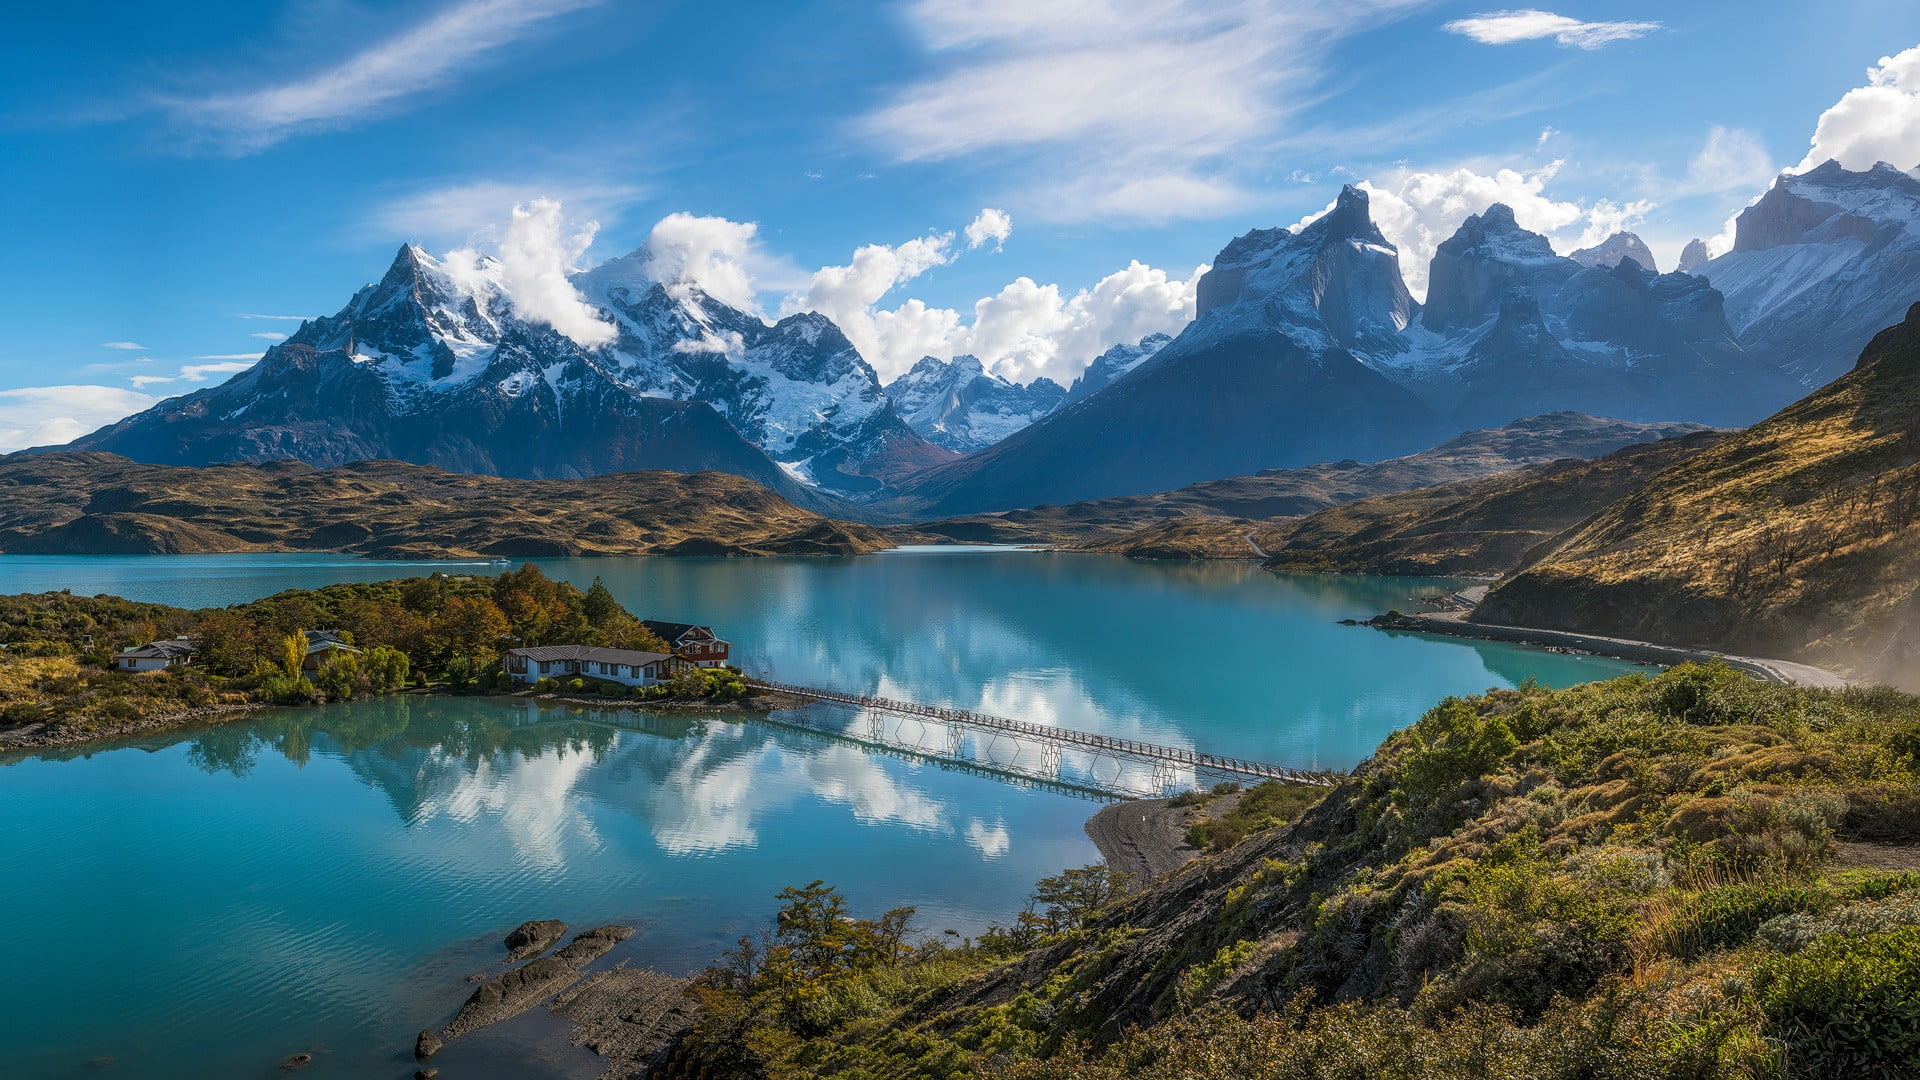 Brown mountain and body of water, Torres del Paine, Patagonia, Chile ...